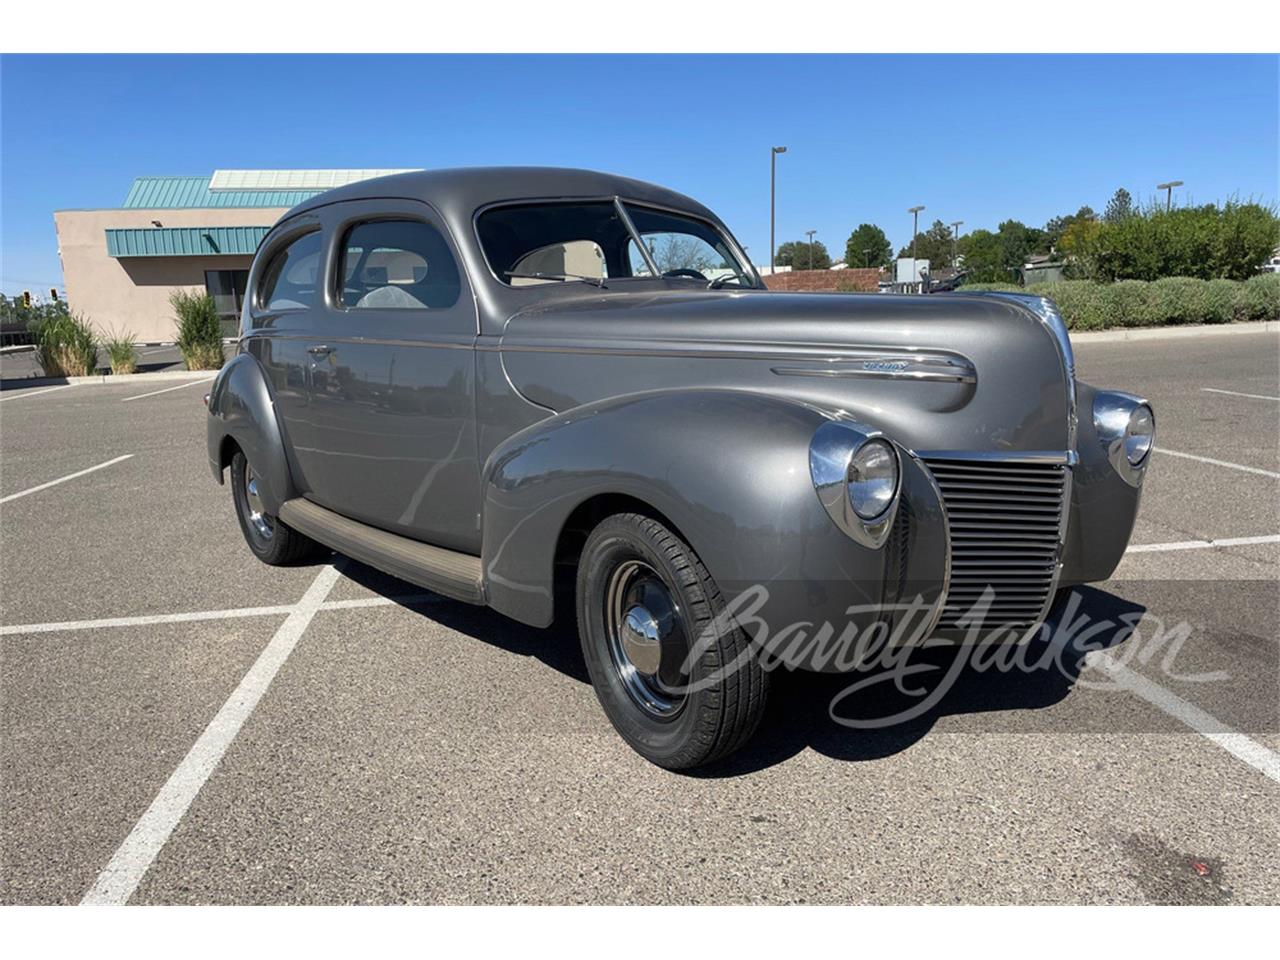 For Sale at Auction: 1939 Mercury Custom in Scottsdale, Arizona for sale in Scottsdale, AZ